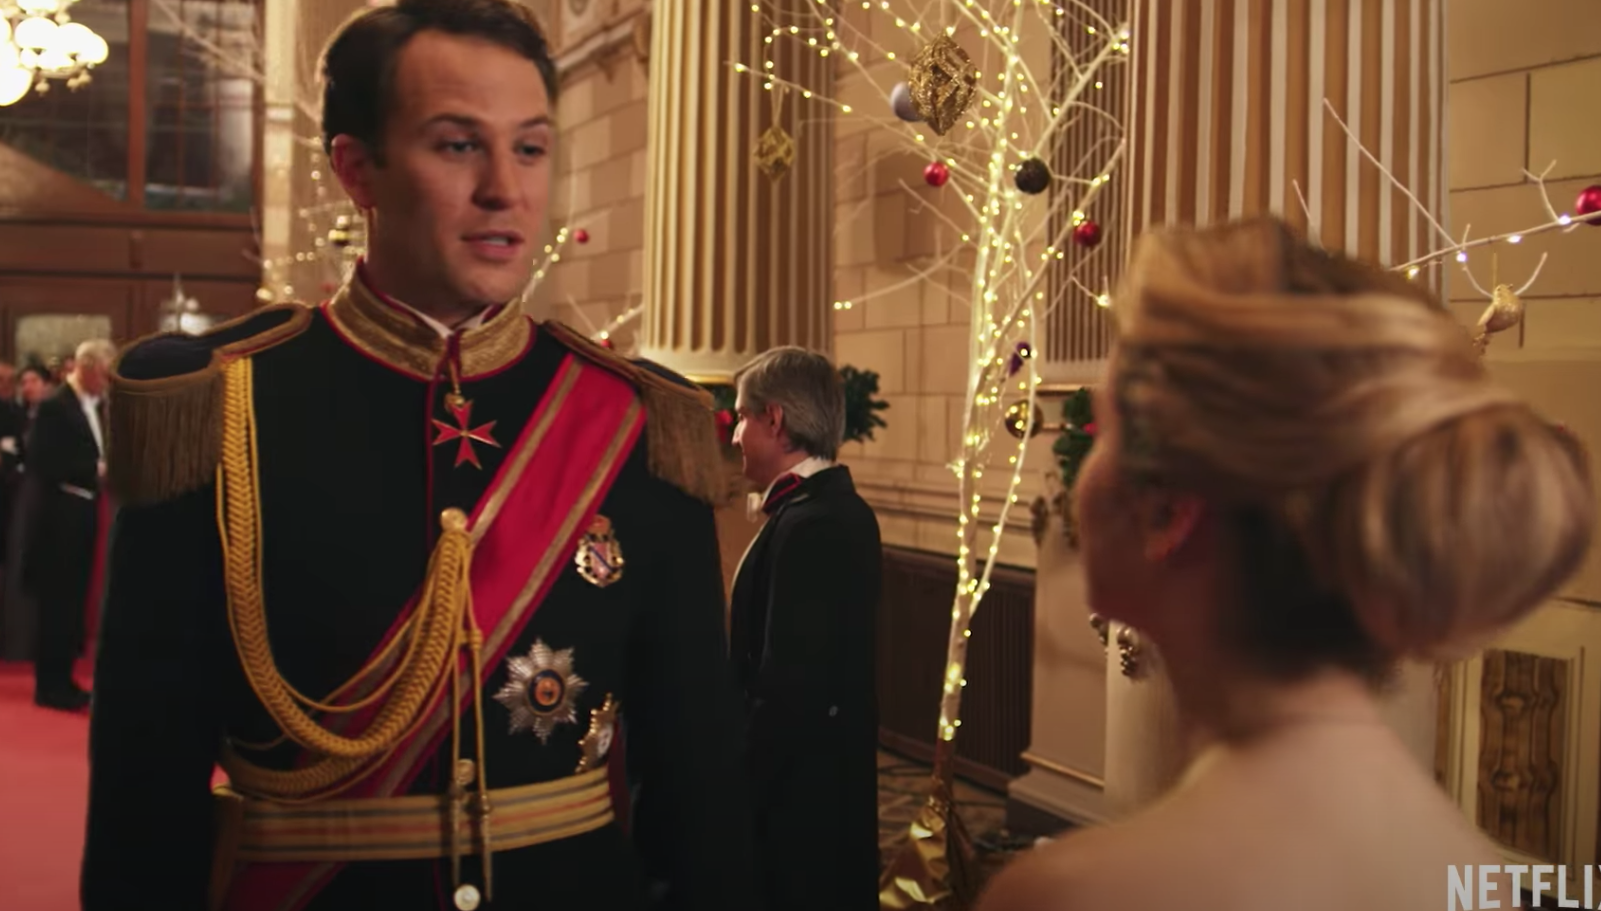 Prince Richard and Amber have a conversation at a ball